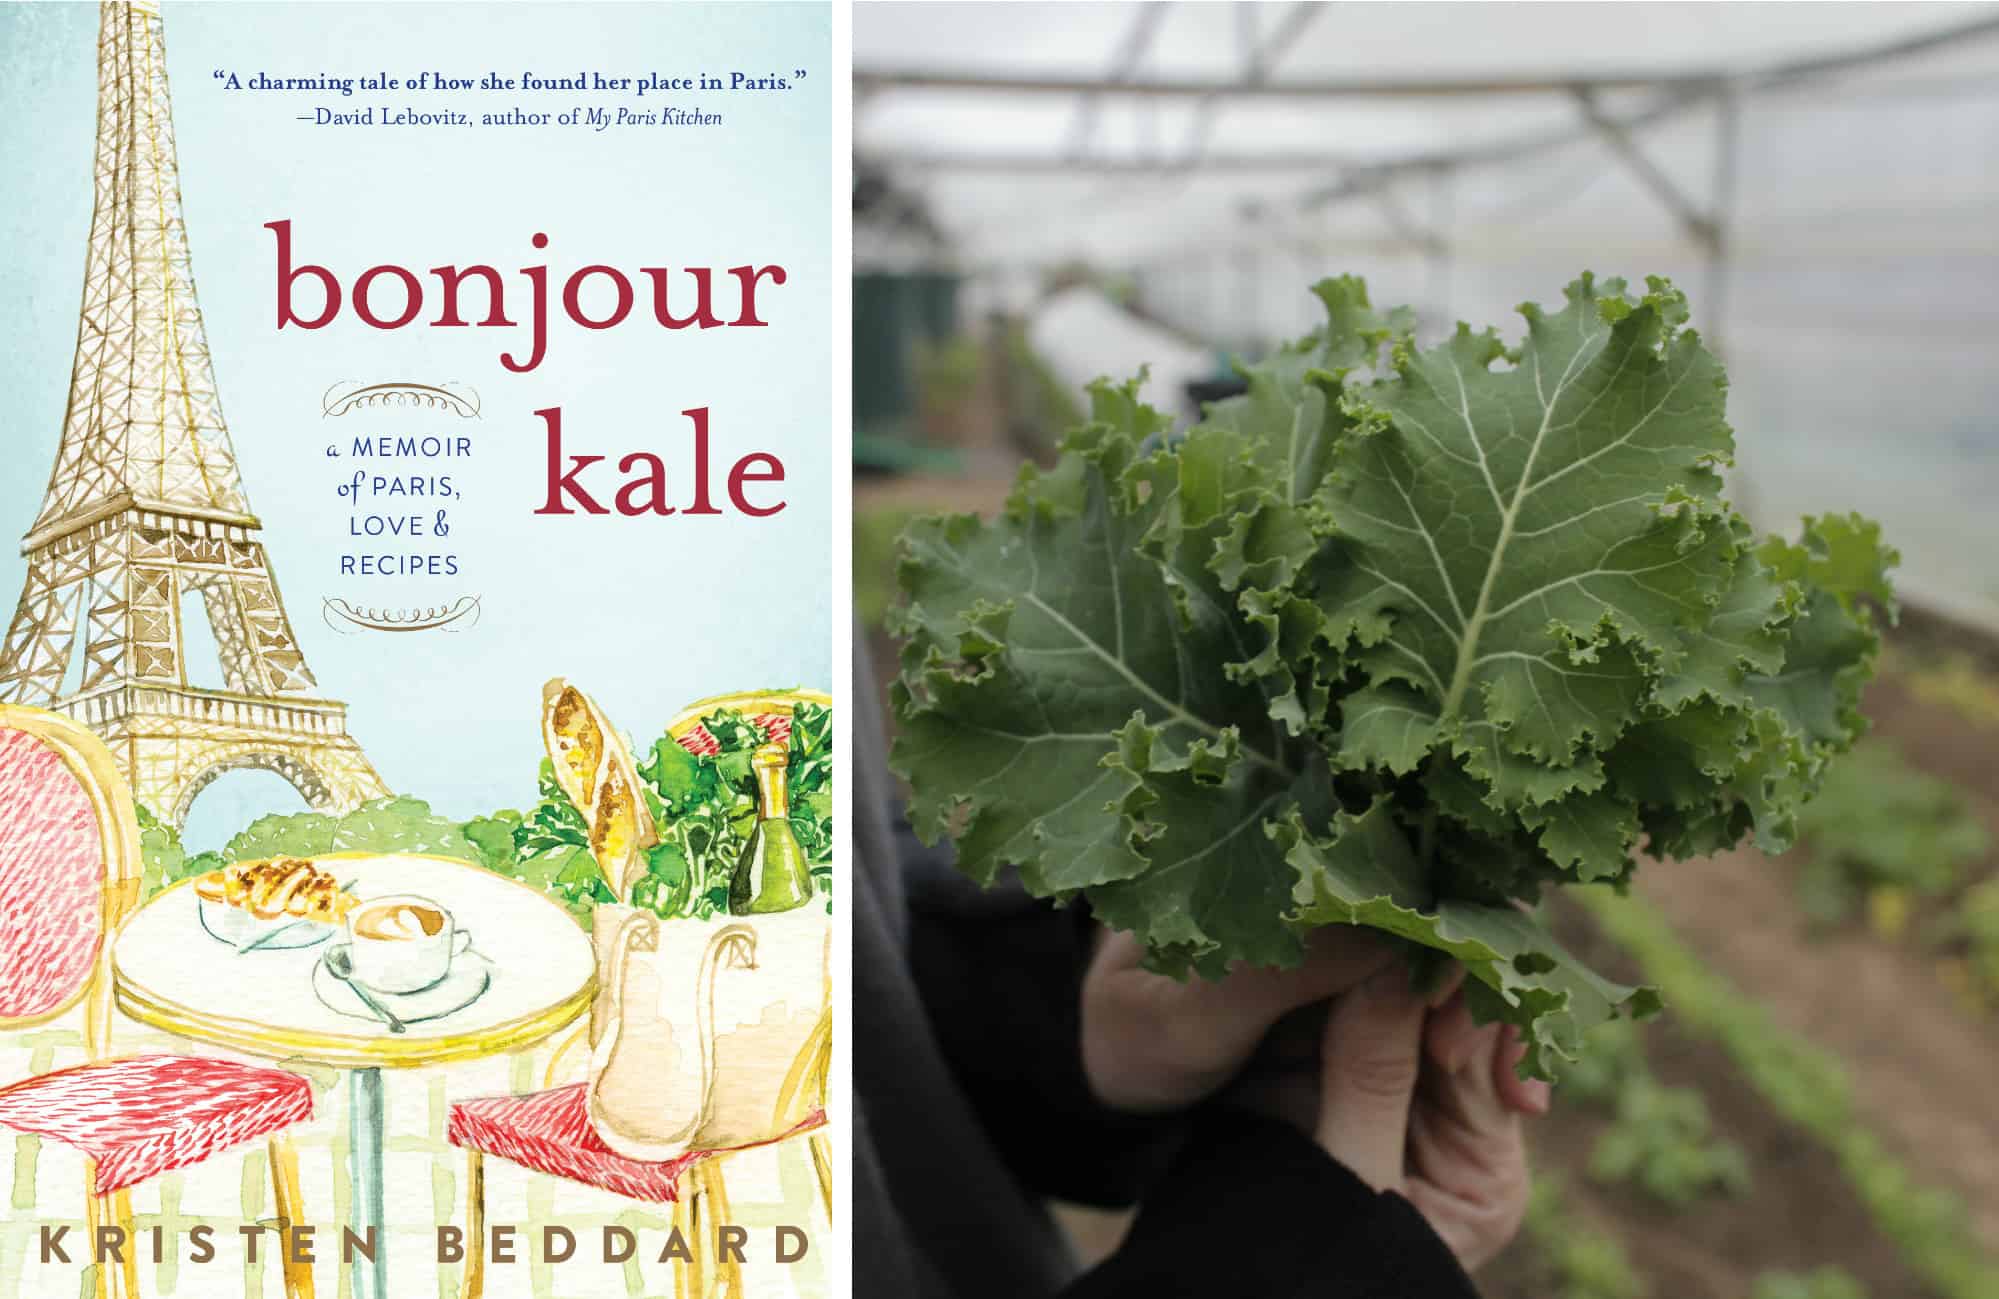 Chatting with Kristen Beddard, Auther of Bonjour Kale and Founder of The Kale Project